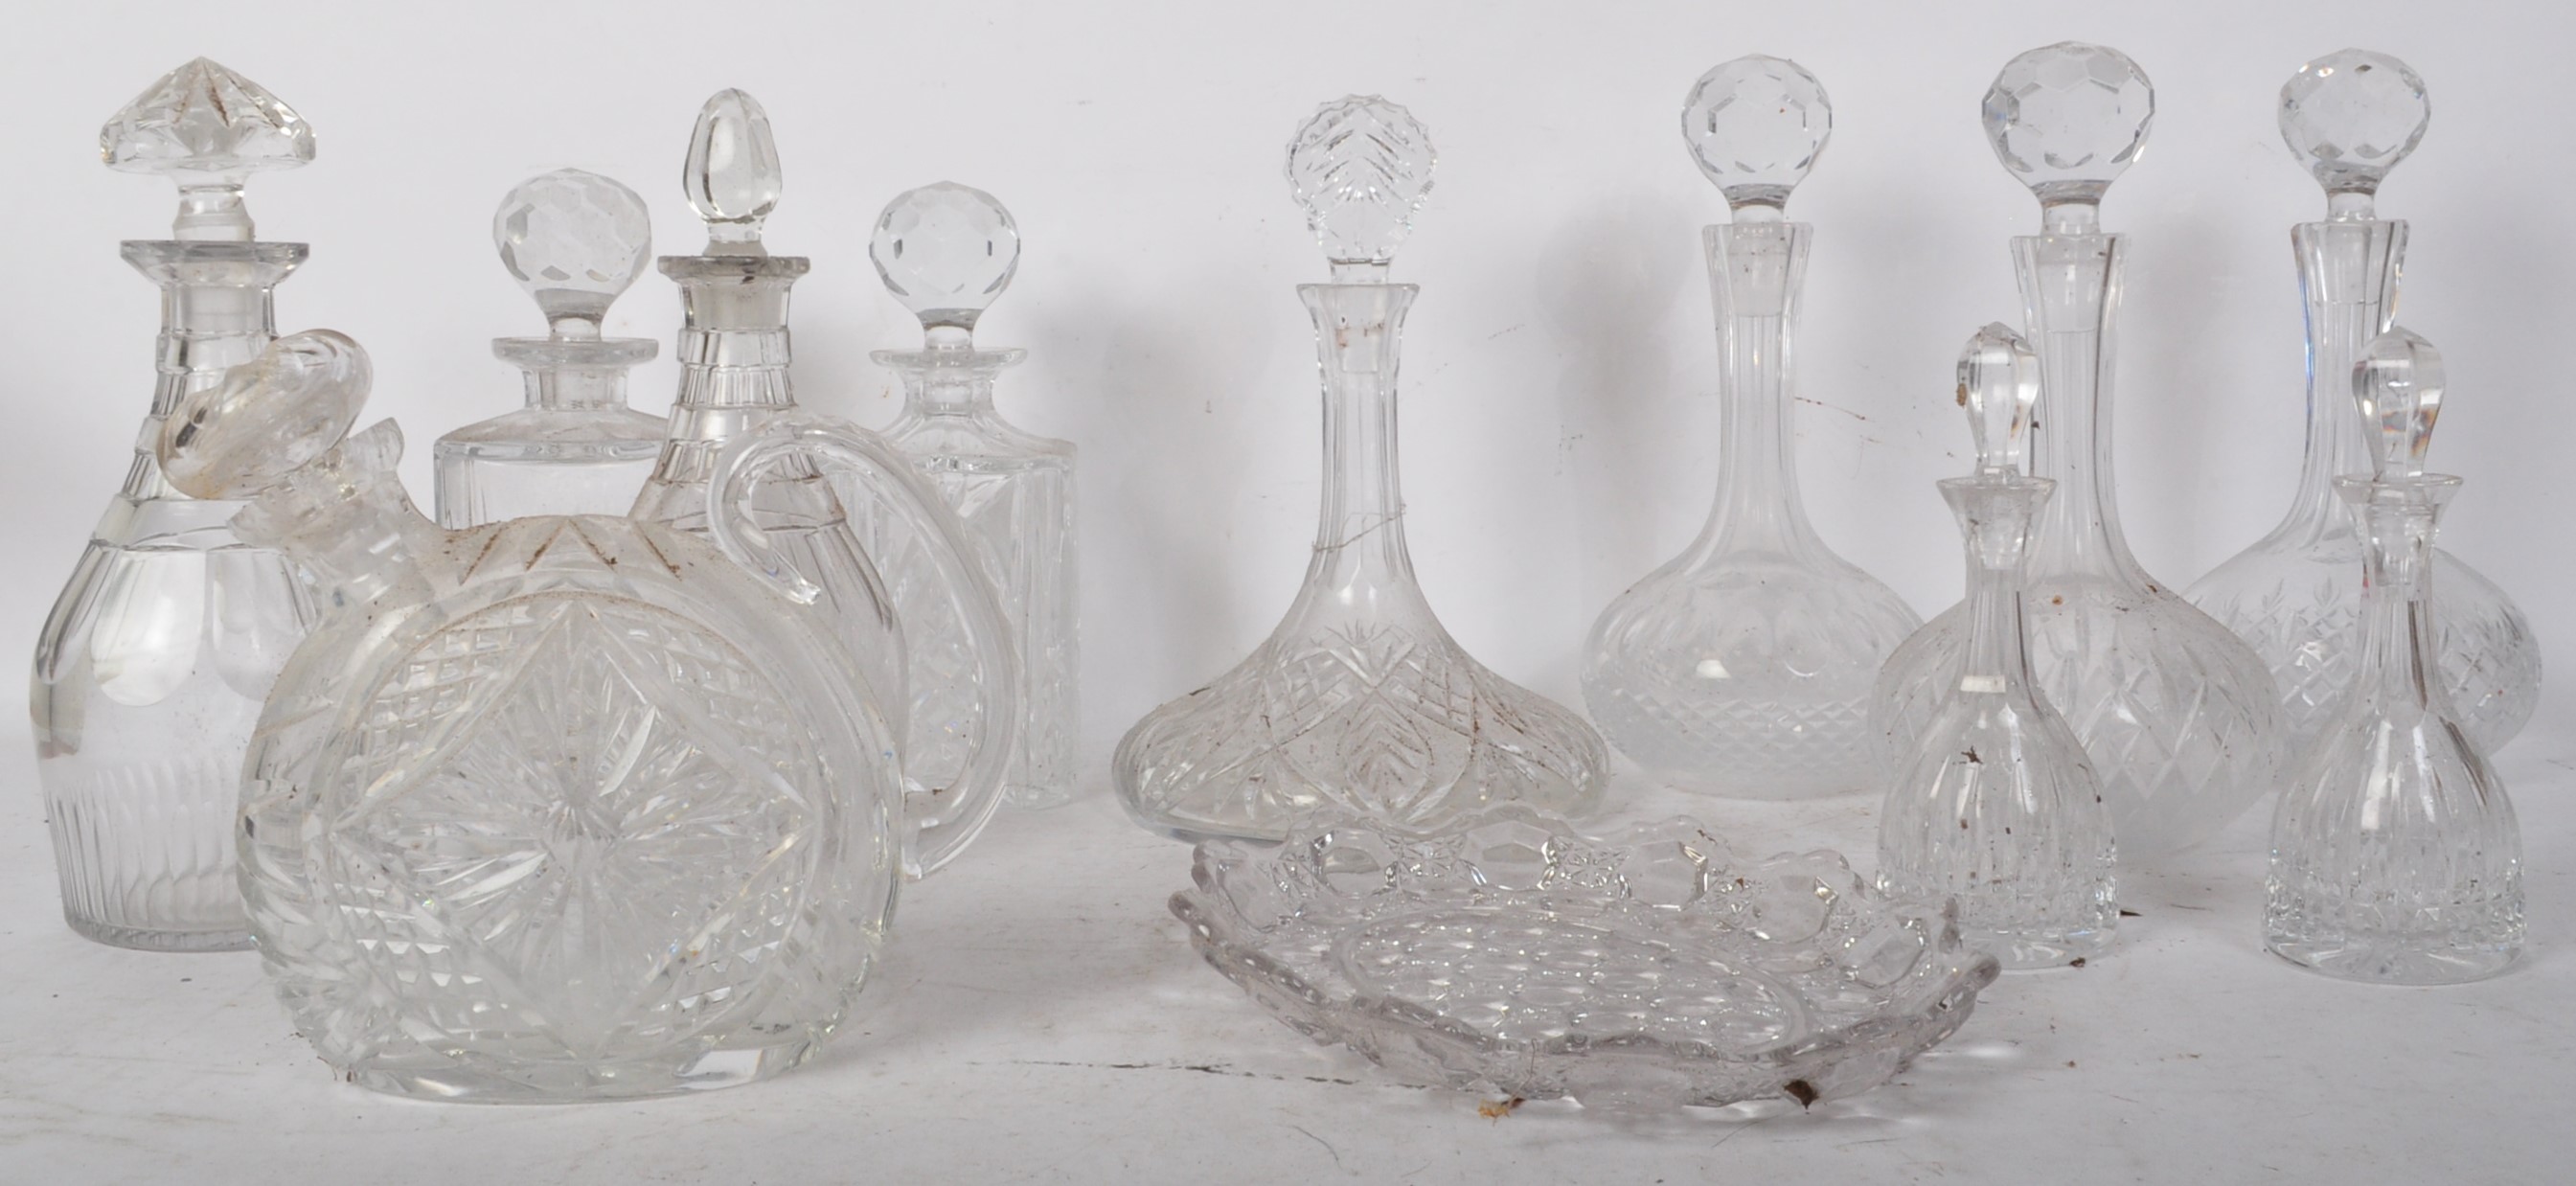 COLLECTION OF VINTAGE CUT GLASS DECANTERS - Image 2 of 6